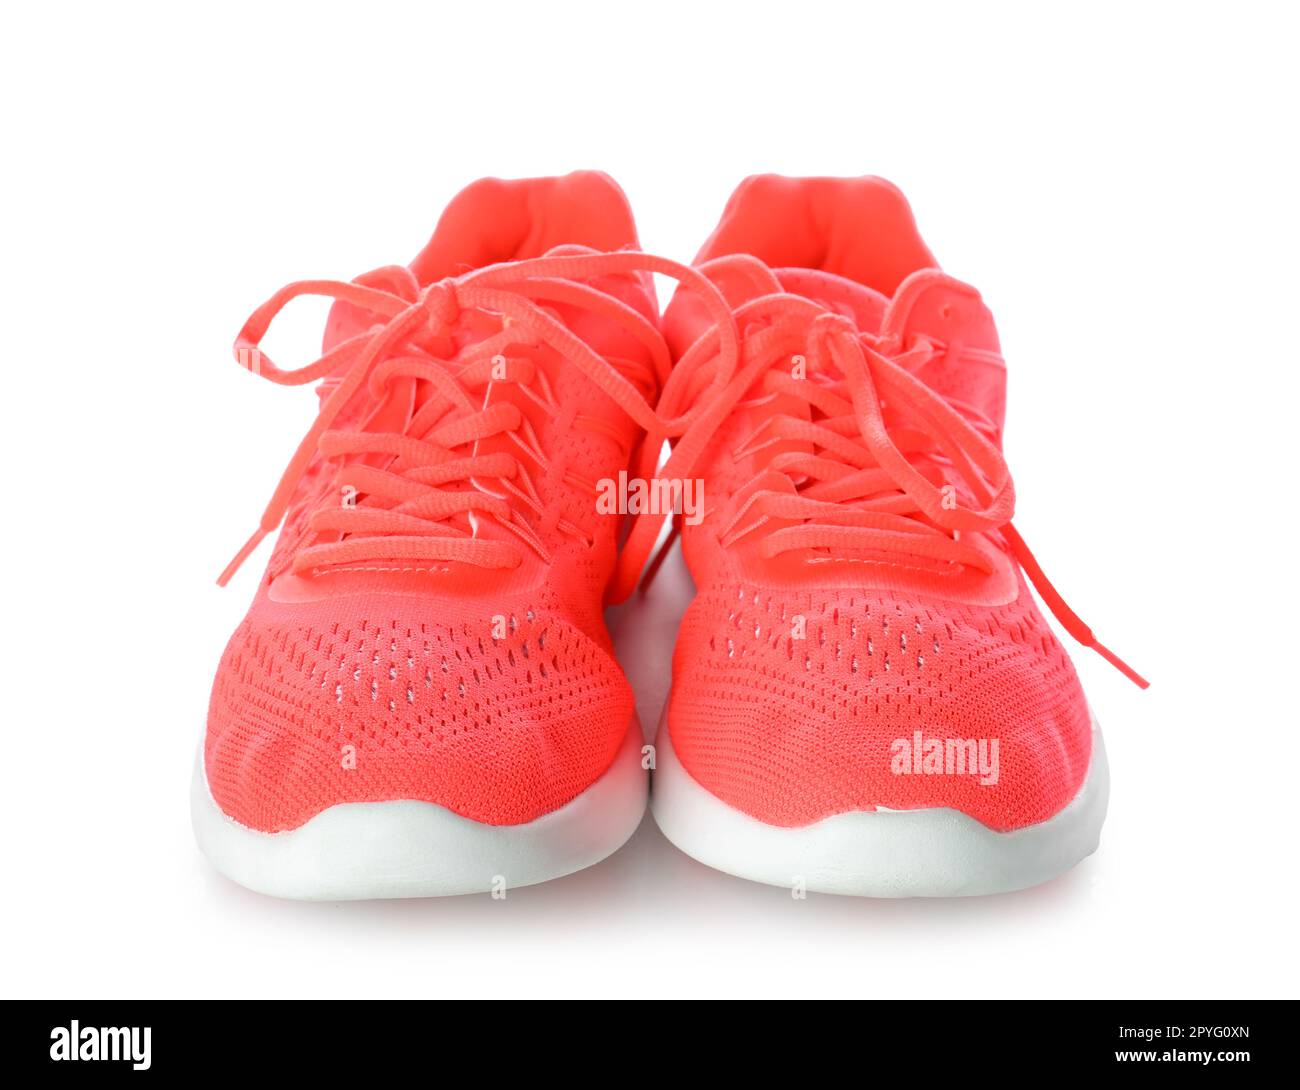 Pair of red trainers Cut Out Stock Images & Pictures - Page 2 - Alamy